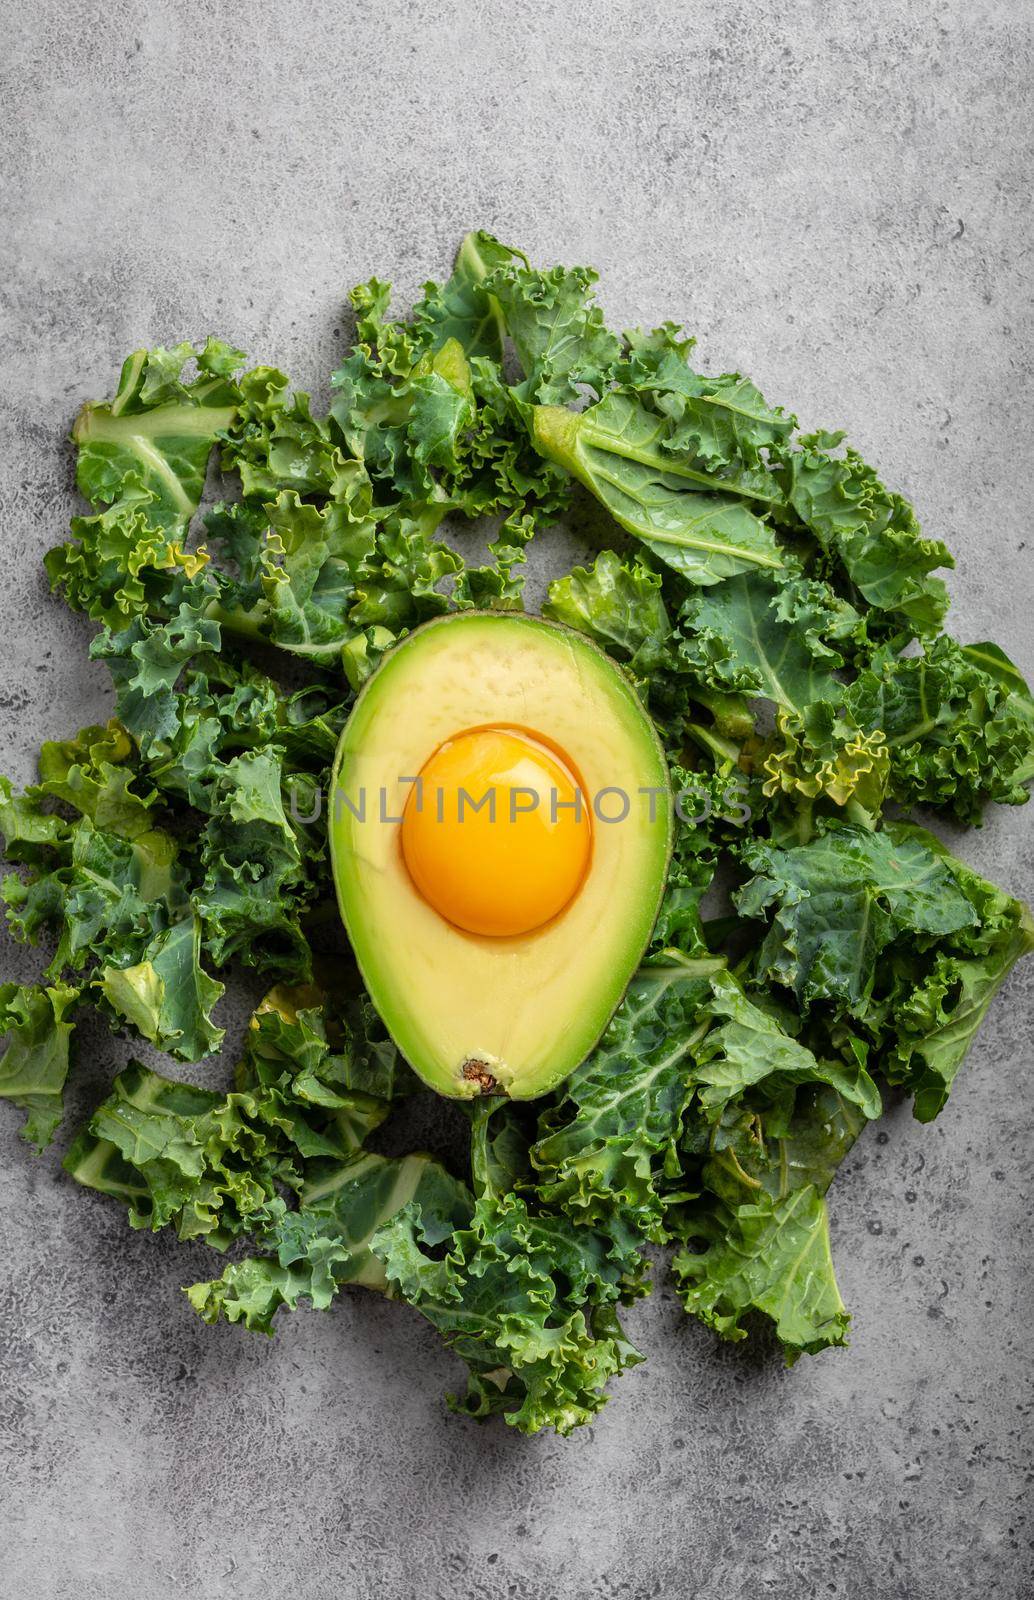 Raw egg yolk in fresh cut half avocado rich in healthy fats and kale leaves for balanced menu on gray stone background. Ketogenic low carbs diet or clean eating concept, top view .